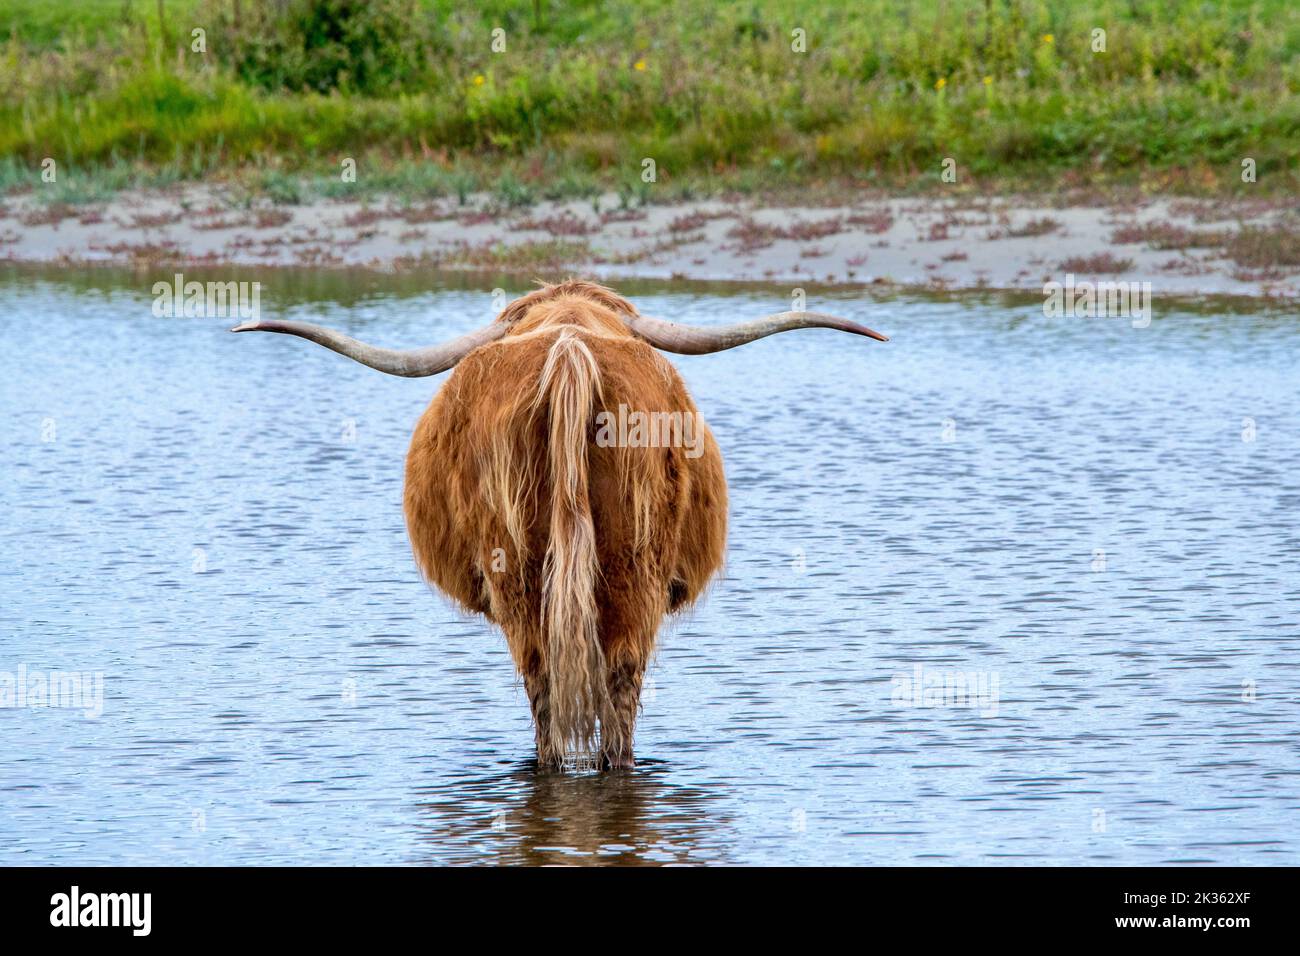 Highland cattle with long horns wading in shallow water of pond Stock Photo